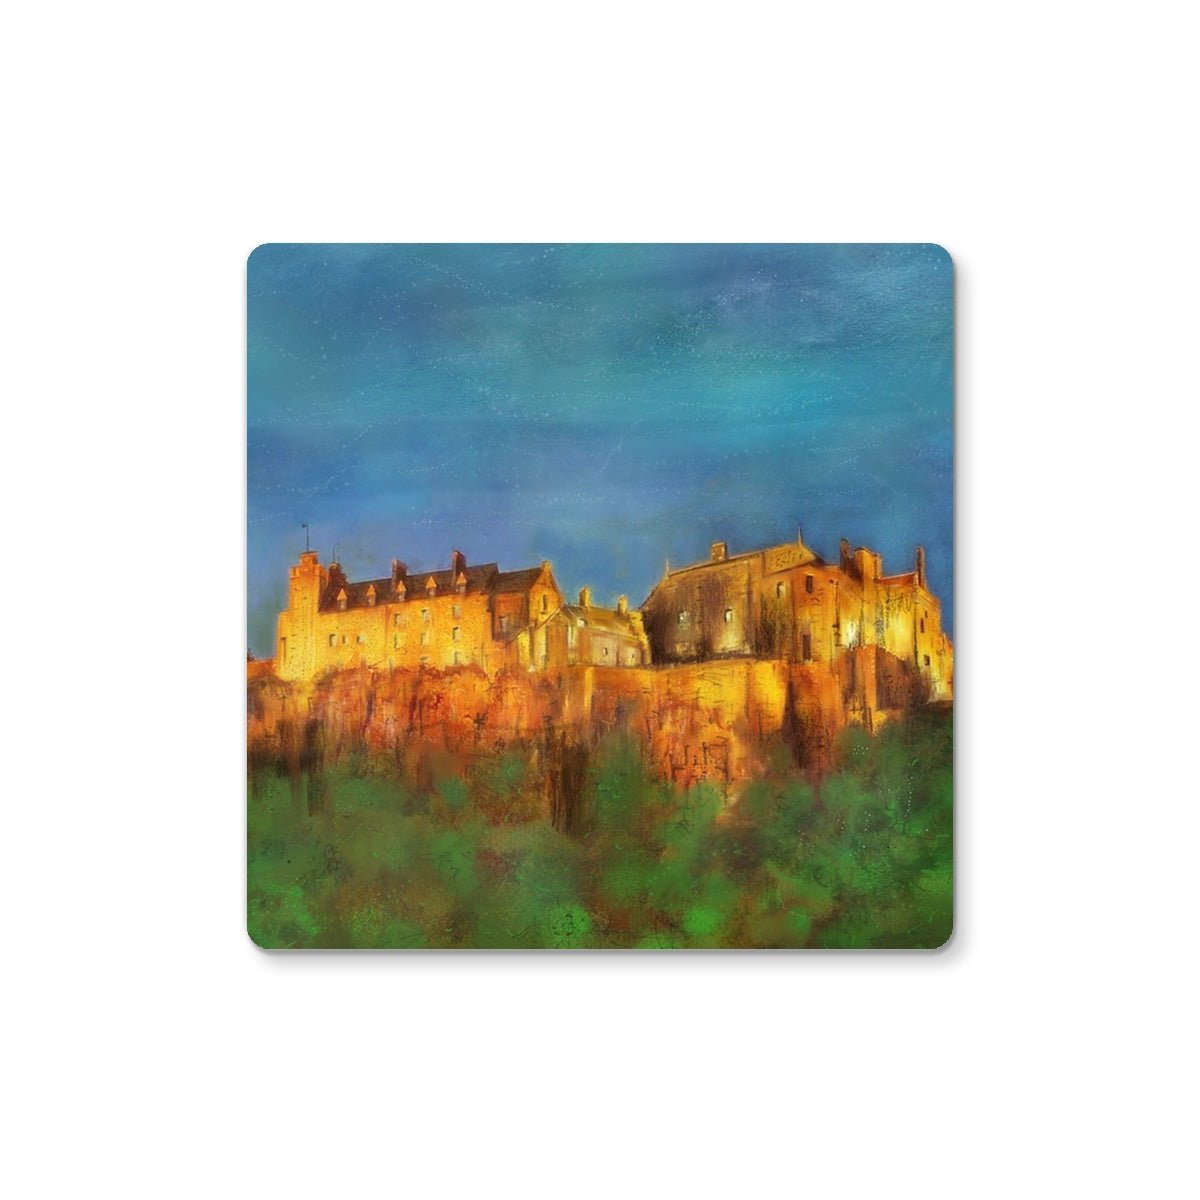 Stirling Castle Art Gifts Coaster-Coasters-Scottish Castles Art Gallery-4 Coasters-Paintings, Prints, Homeware, Art Gifts From Scotland By Scottish Artist Kevin Hunter